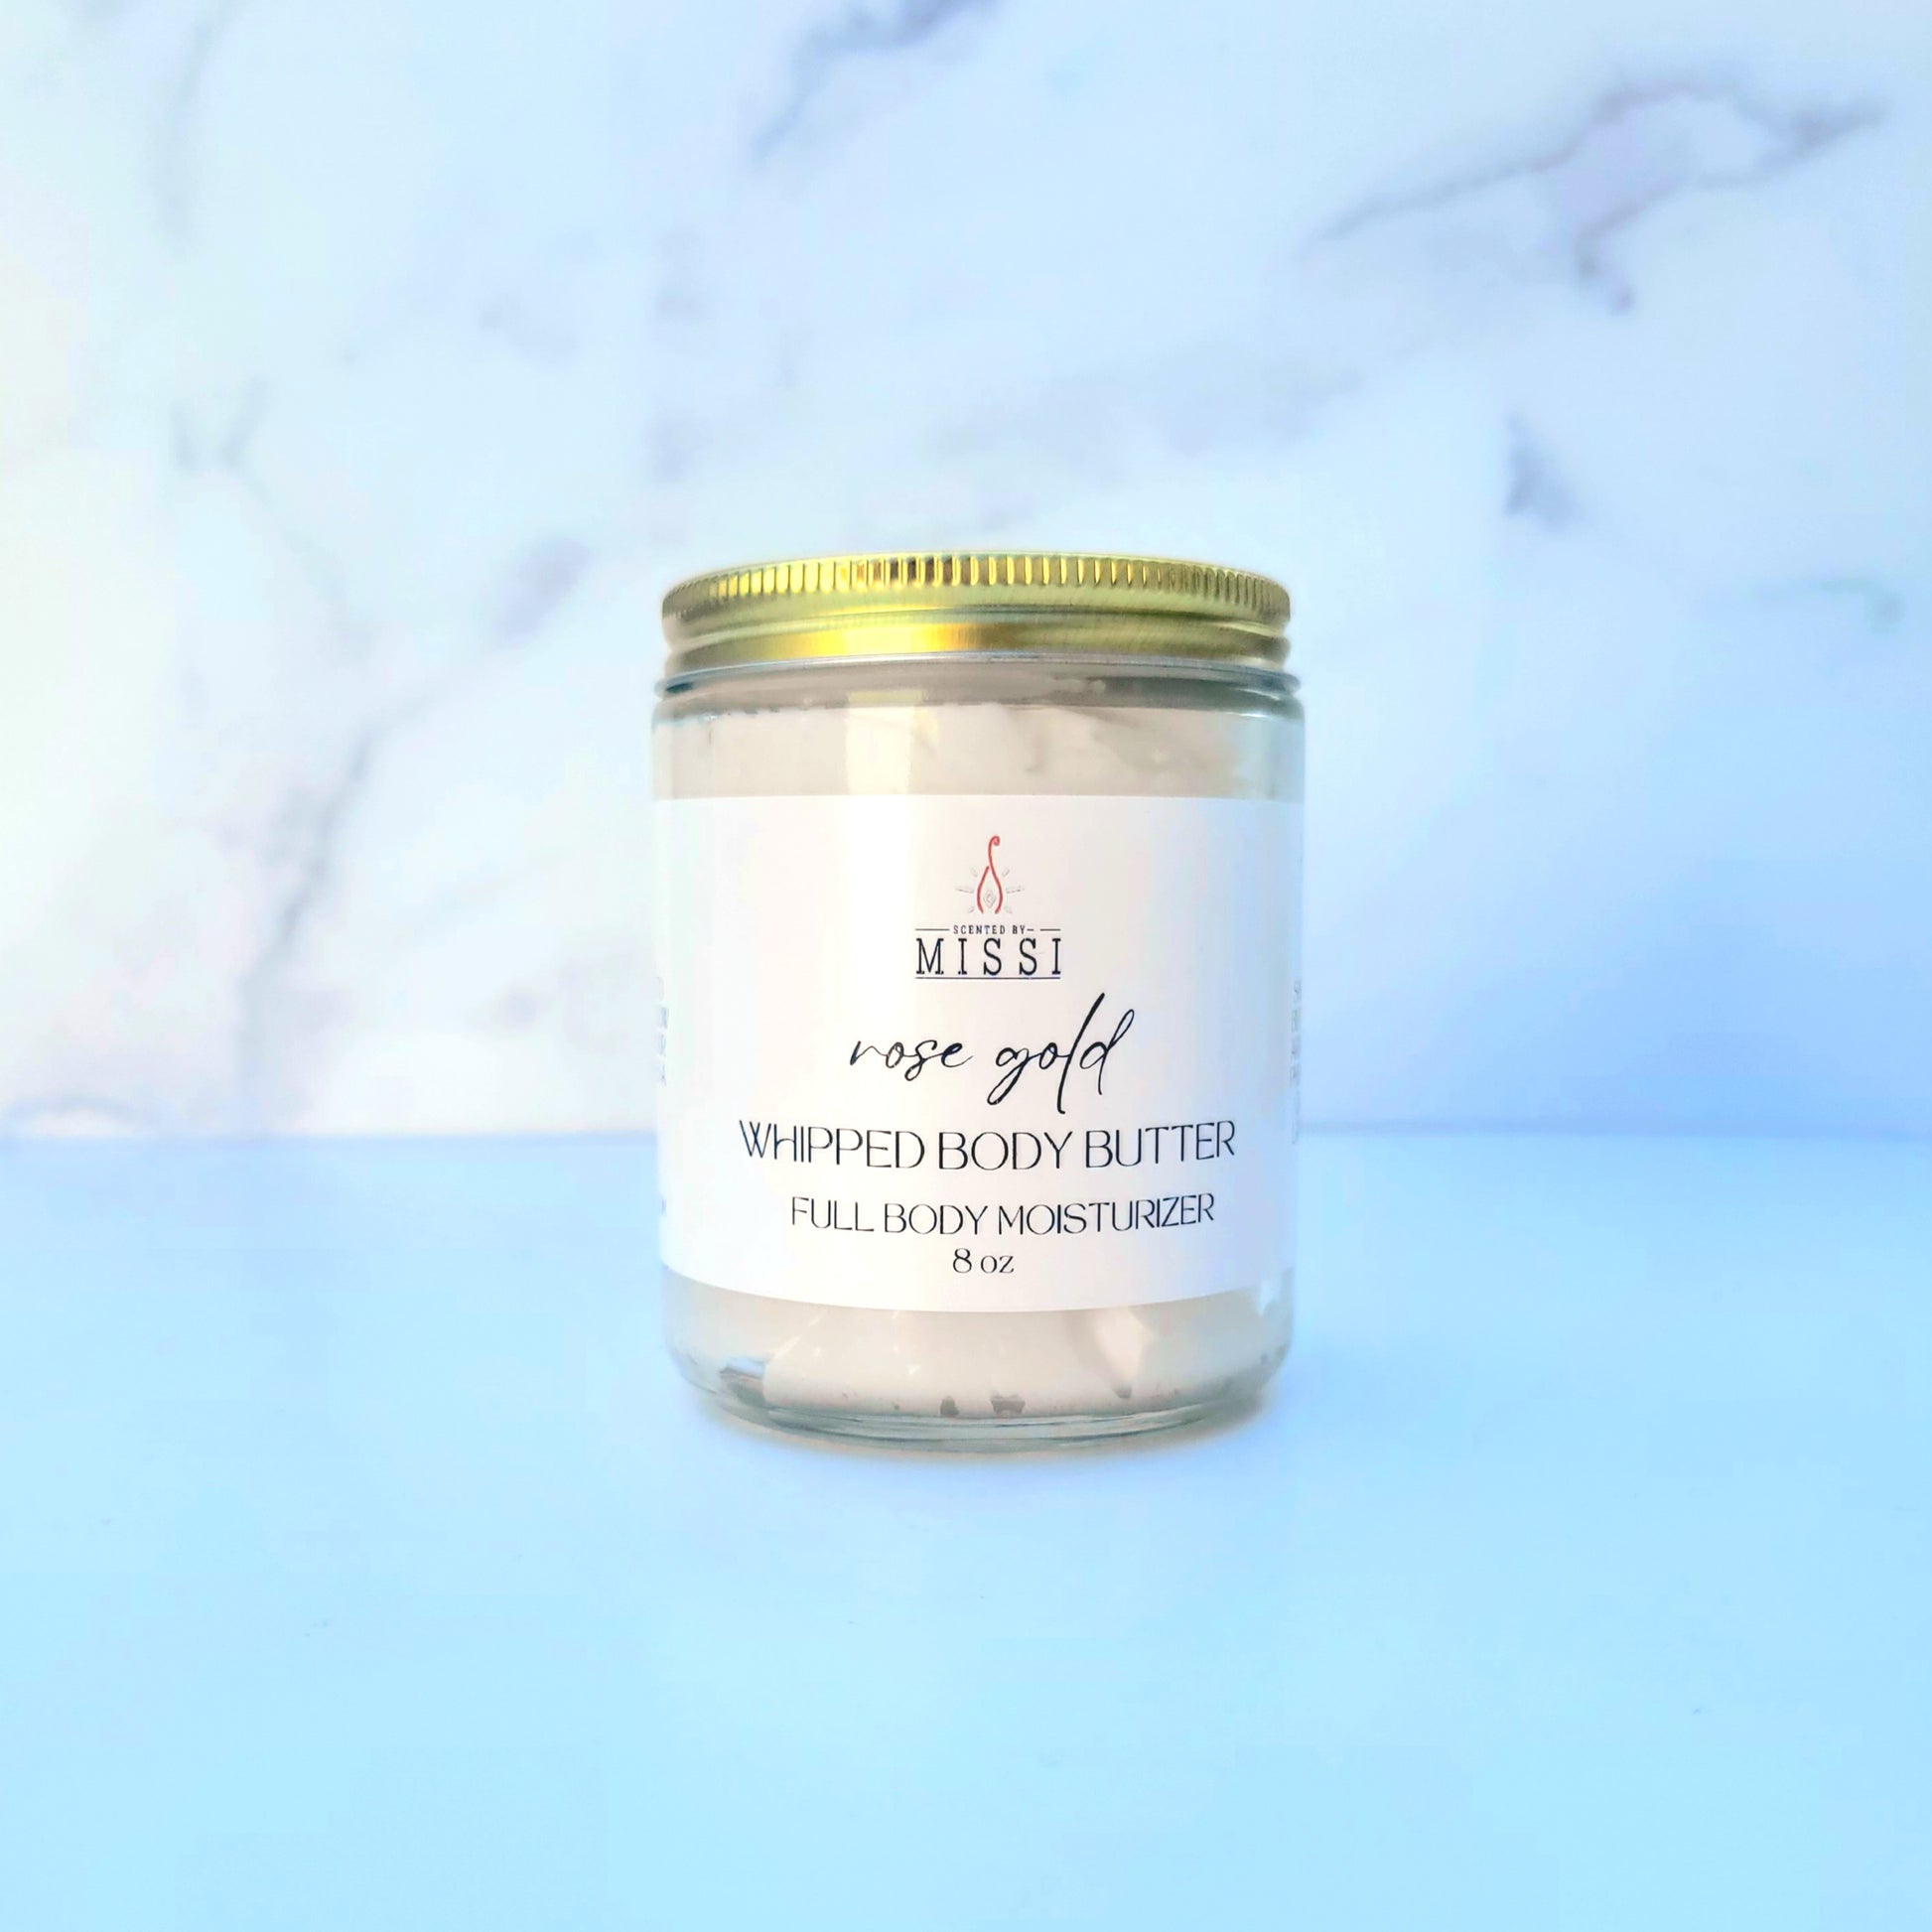 Rose gold whipped body butter